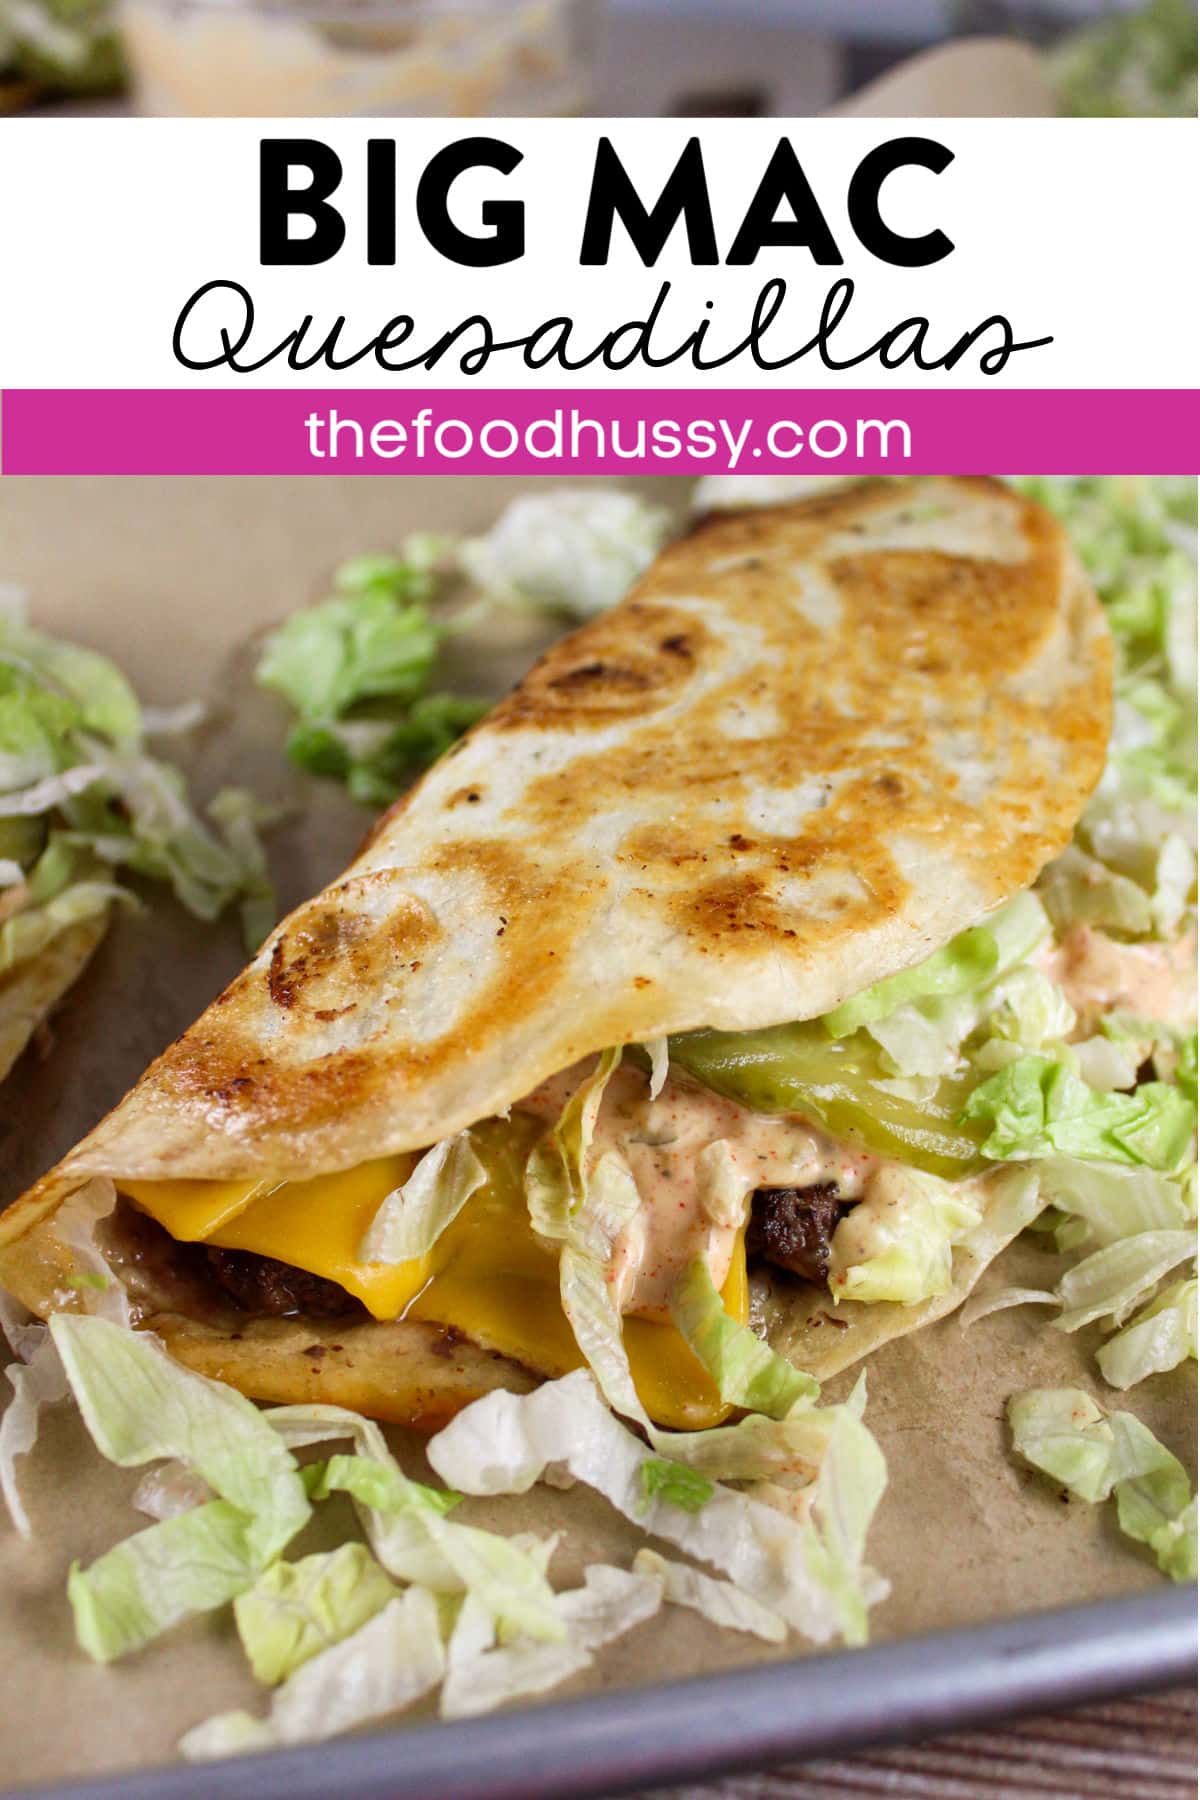 Big Mac Quesadillas is my new favorite quick dinner! It's a whole new take on the famous fast food burger and a quesadilla! Tortillas filled with a hamburger, cheese, pickles, lettuce and Big Mac sauce - so yum!  via @foodhussy